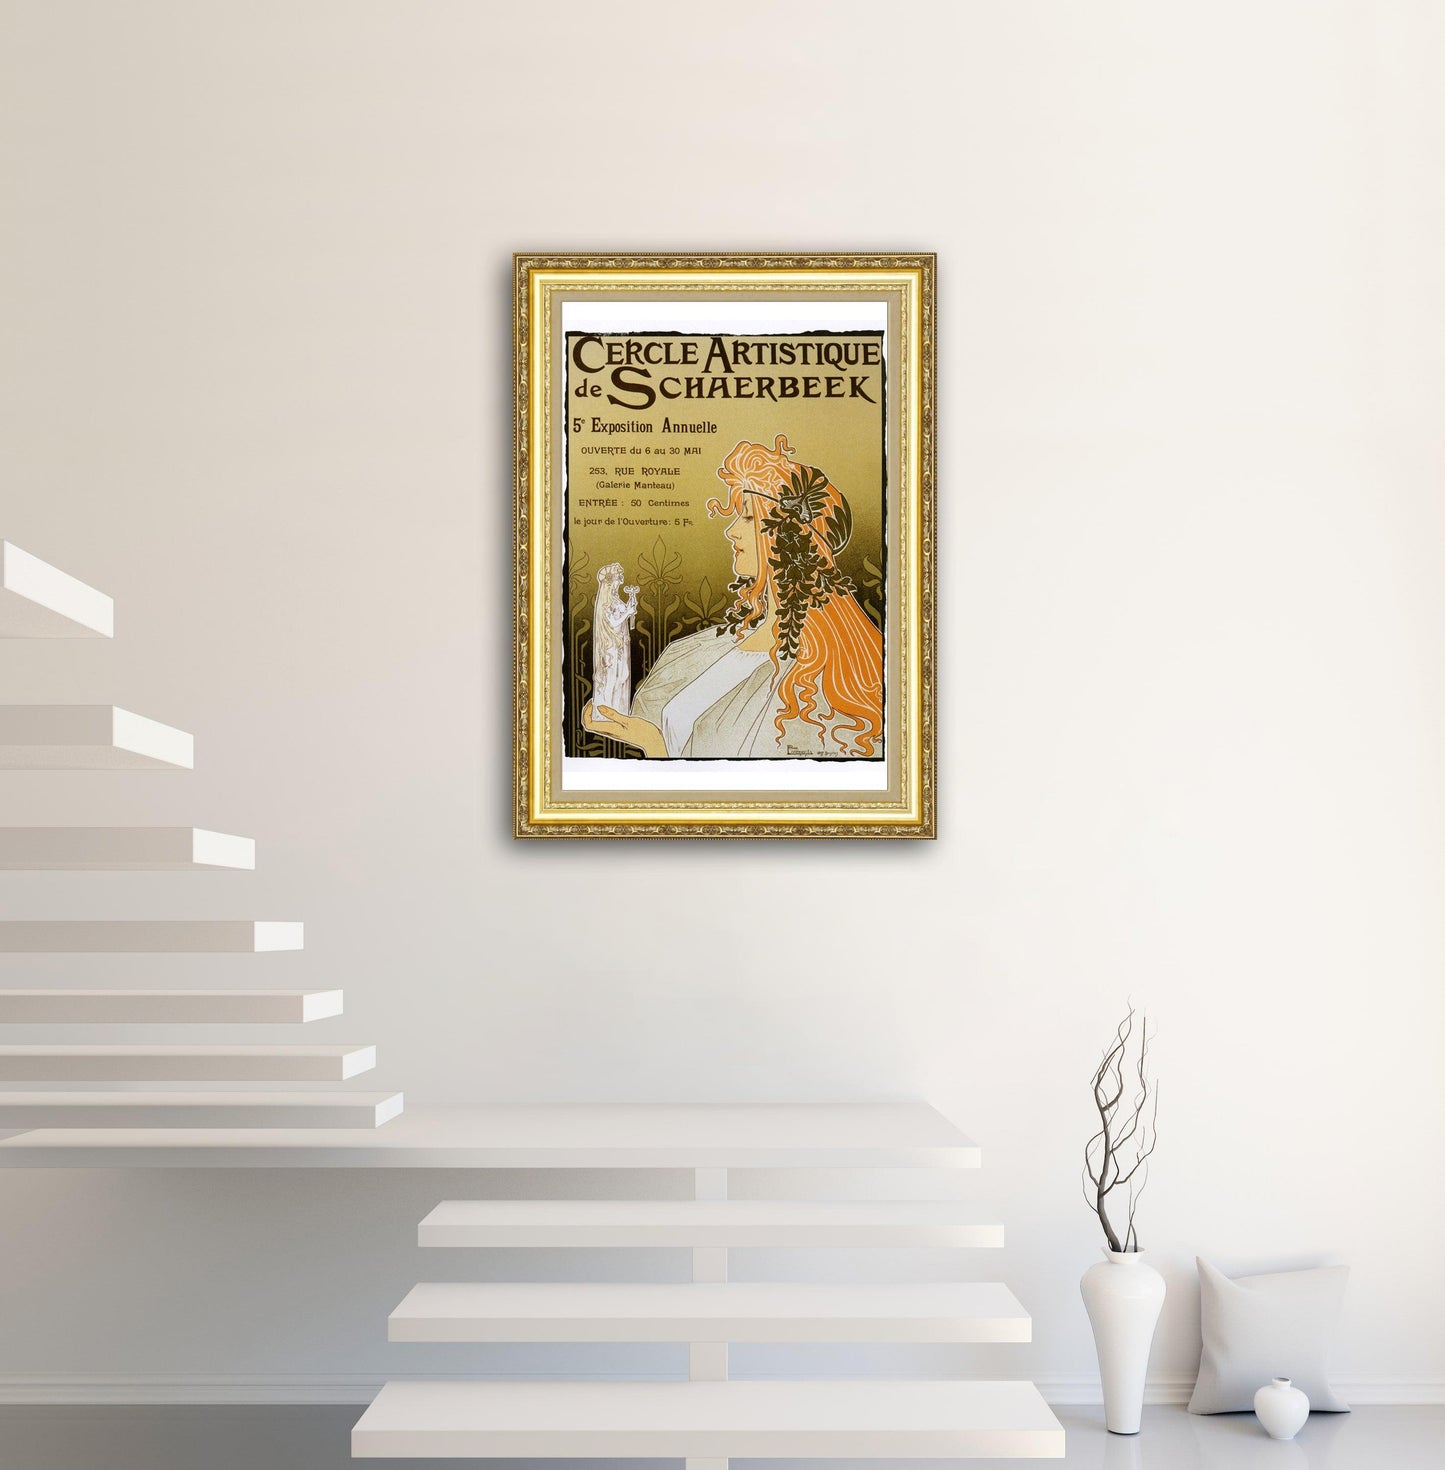 Give your home decor a touch of elegance through our exquisite Cercle Artistique de Schaerbeek reproduction poster. The artwork is a collage with the exhibition posters design Privat Livemont (Belgian graphic designer, 1861-1936). Year of created 1897.